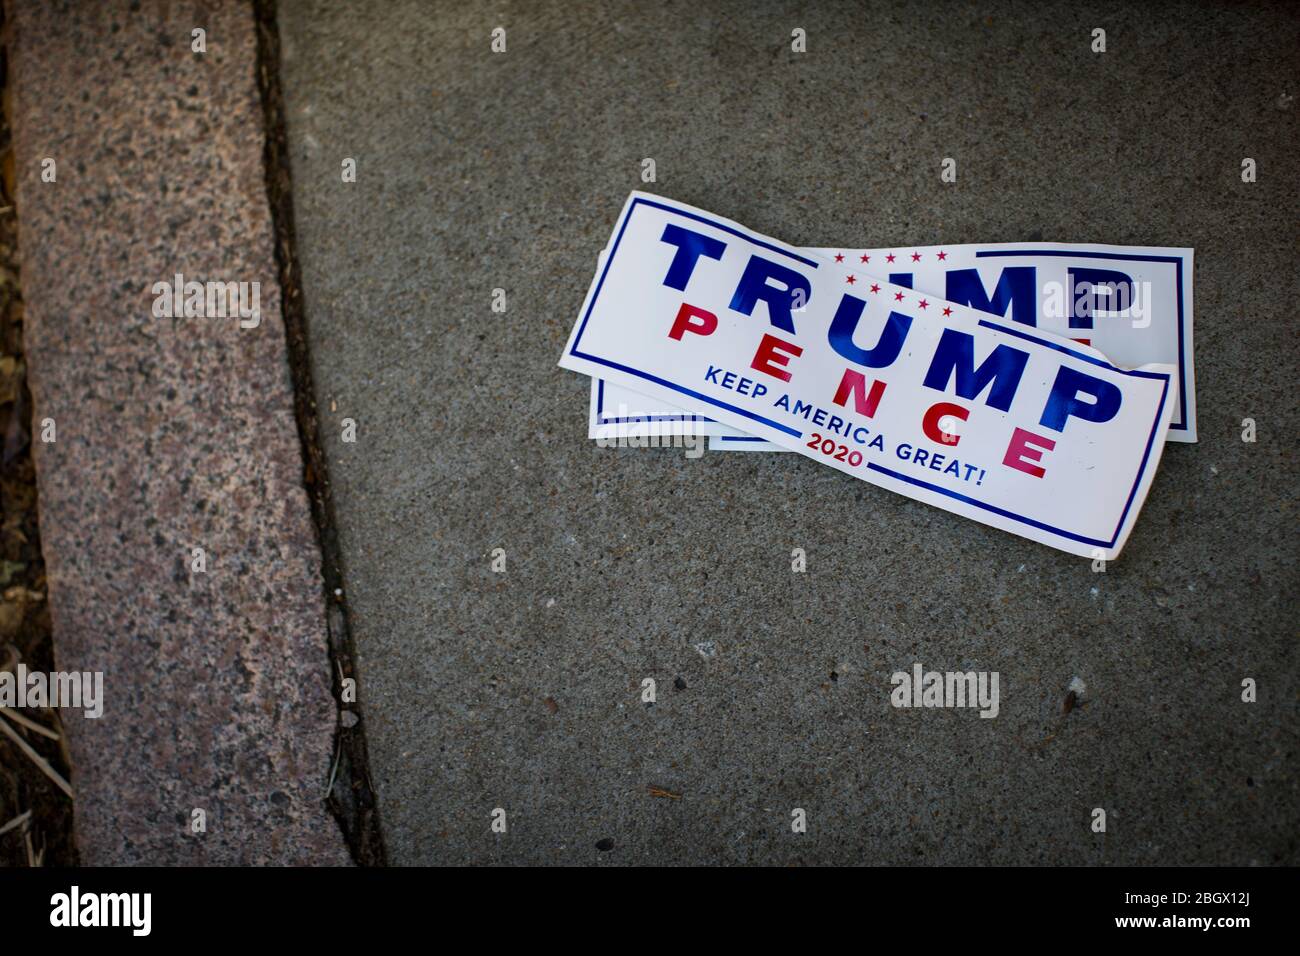 Richmond, Virginia, USA. 22nd Apr, 2020. Trump/Pence campaign stickers were dropped on the sidewalk near Capitol Square during the Reopen Virginia Rally on Wednesday April 22, 2020 in Richmond, VA. President Trump supports a gradual reopening of states that are not COVID-19 hotspots to help reinvigorate the U.S. economy. Credit: John C. Clark/ZUMA Wire/Alamy Live News Stock Photo